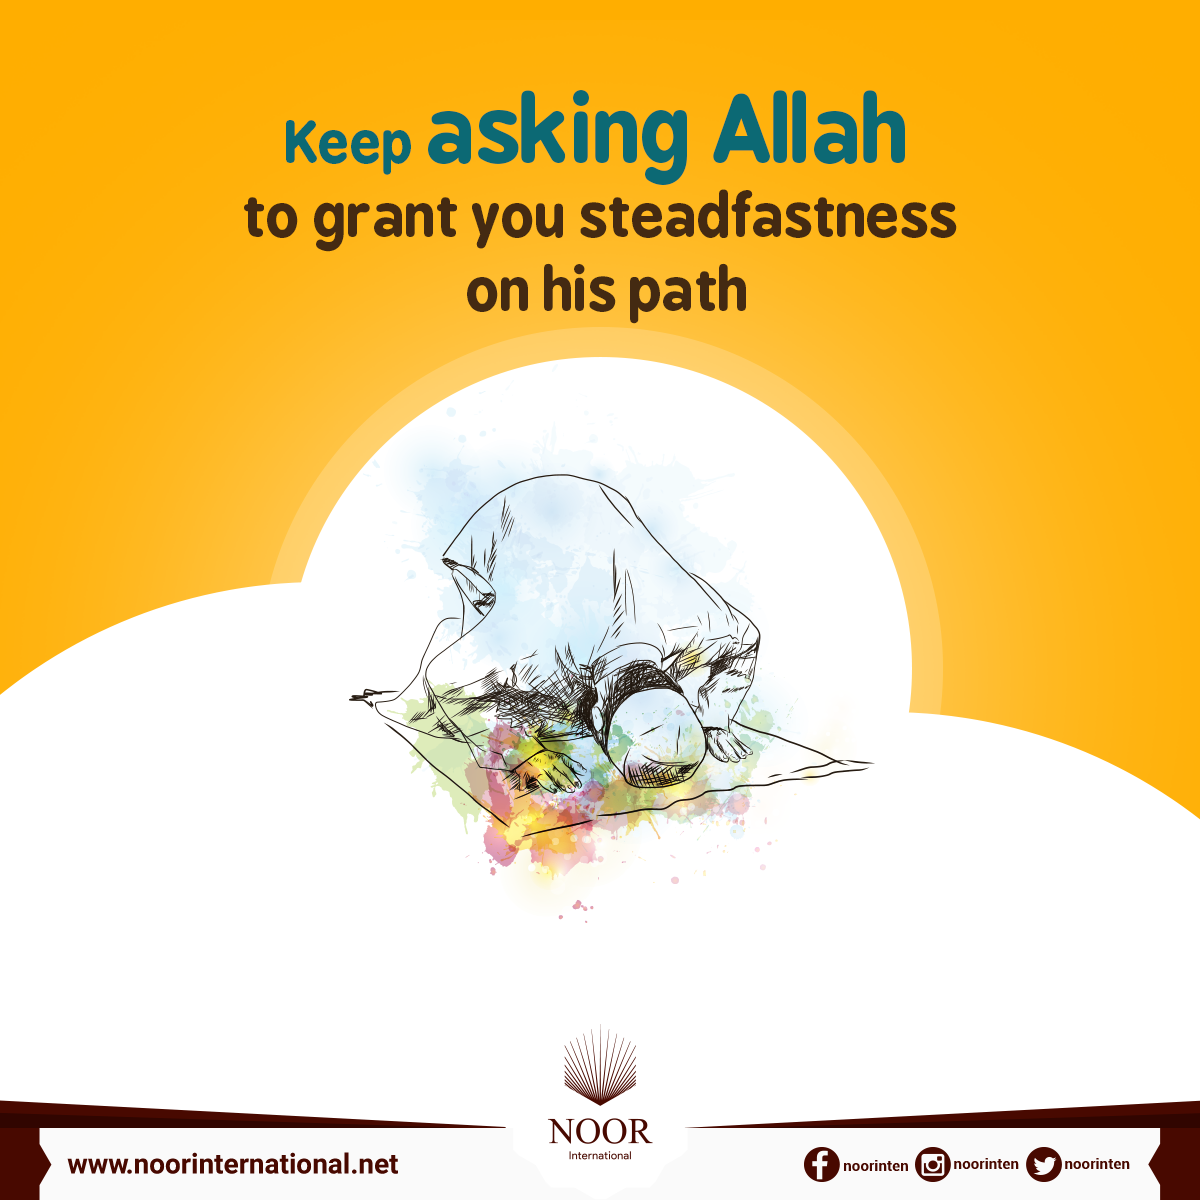 Keep asking Allah to grant you steadfastness on his path